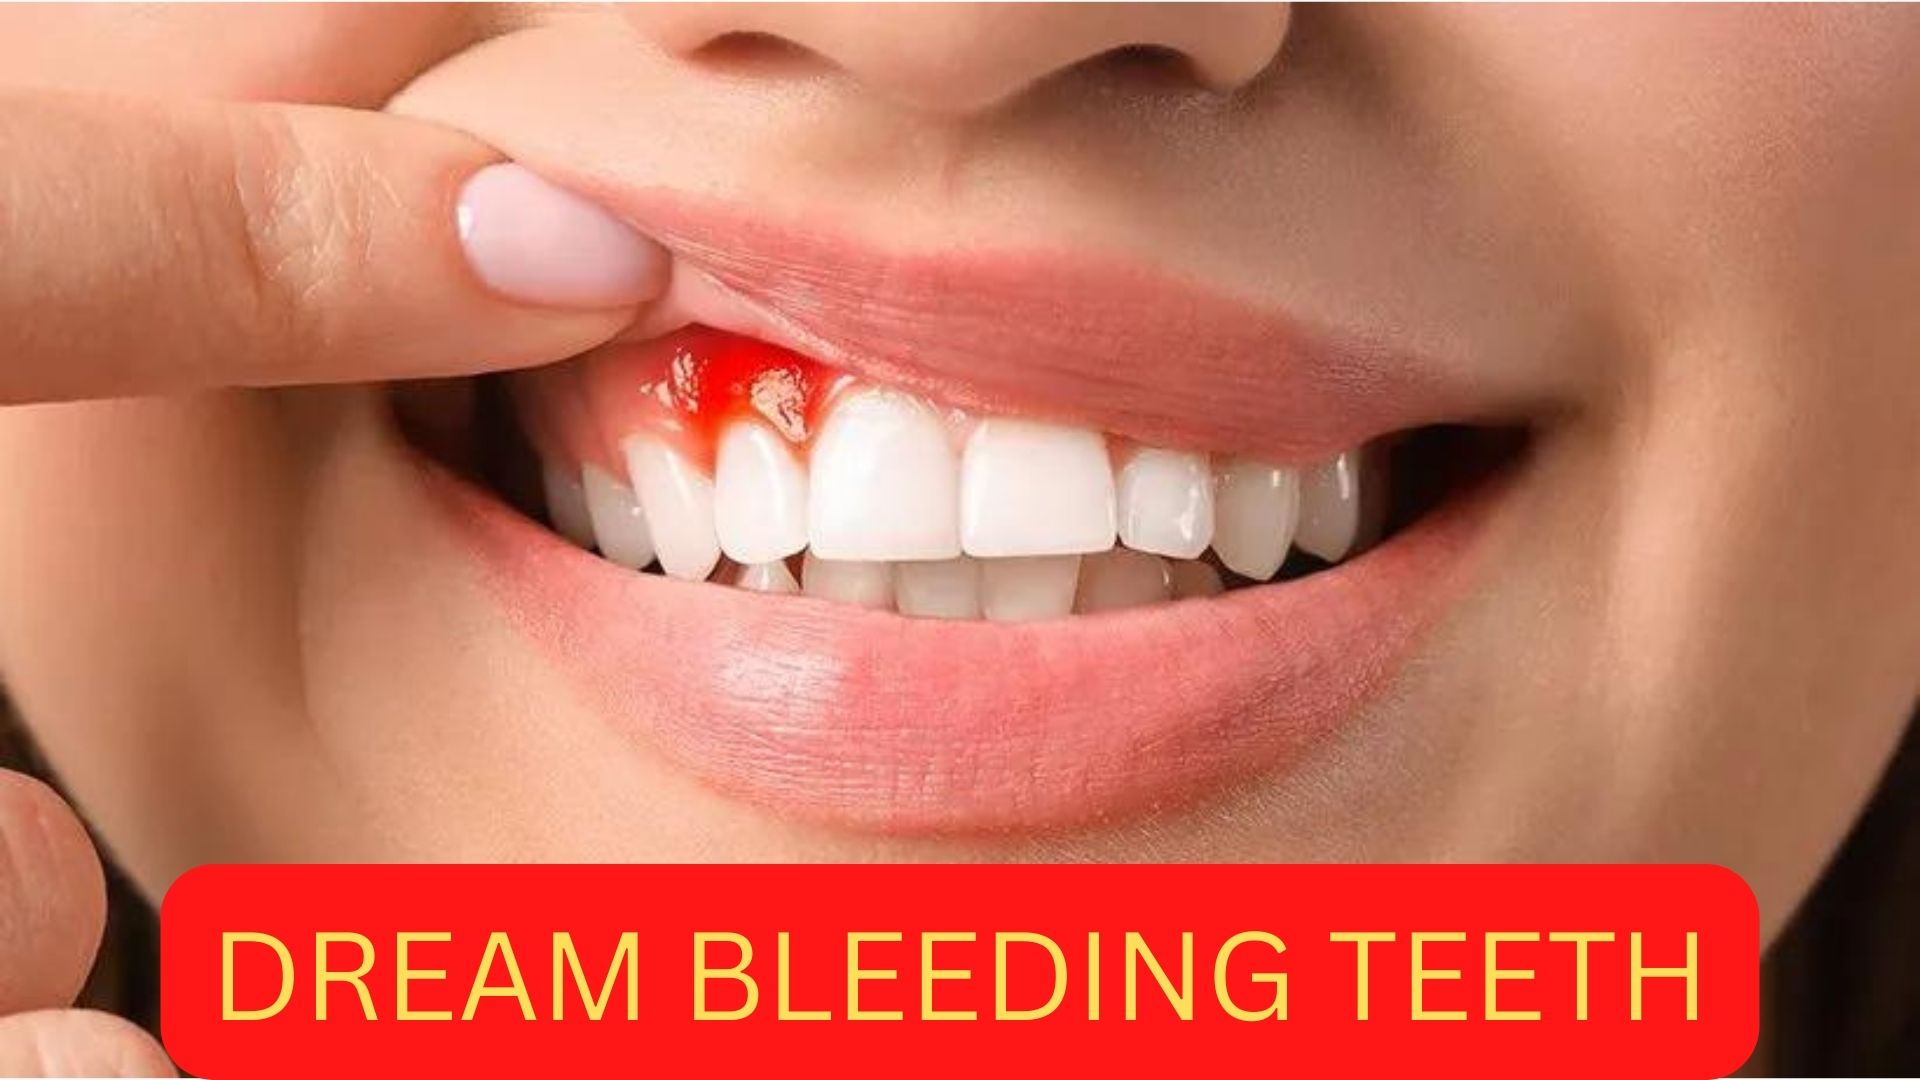 Dream Bleeding Teeth Symbolism - You Have Some Unhealed Wounds